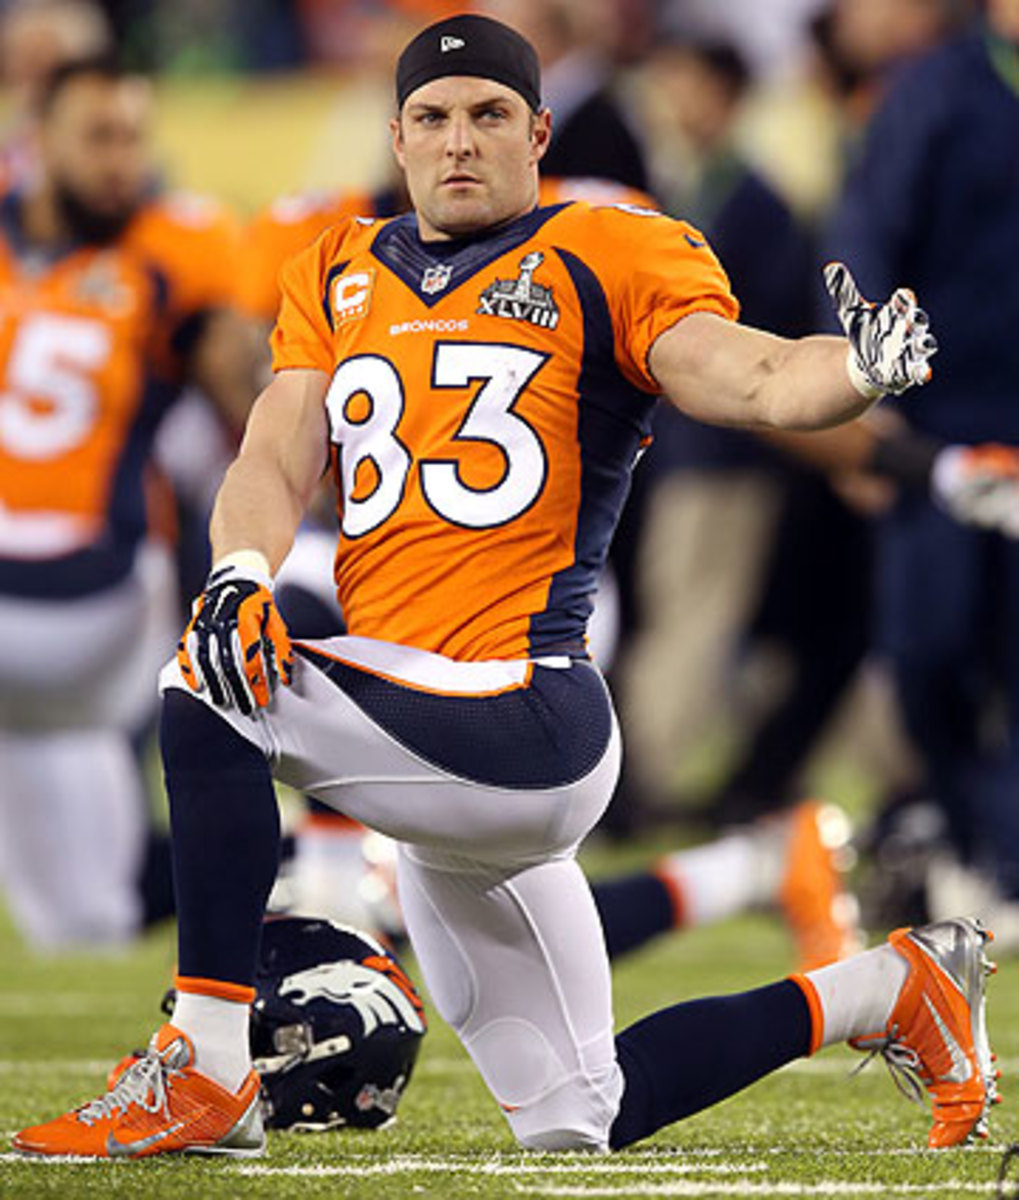 Wes Welker went from being a 'camp body' to having a very productive NFL career. (Jeff Gross/Getty Images)